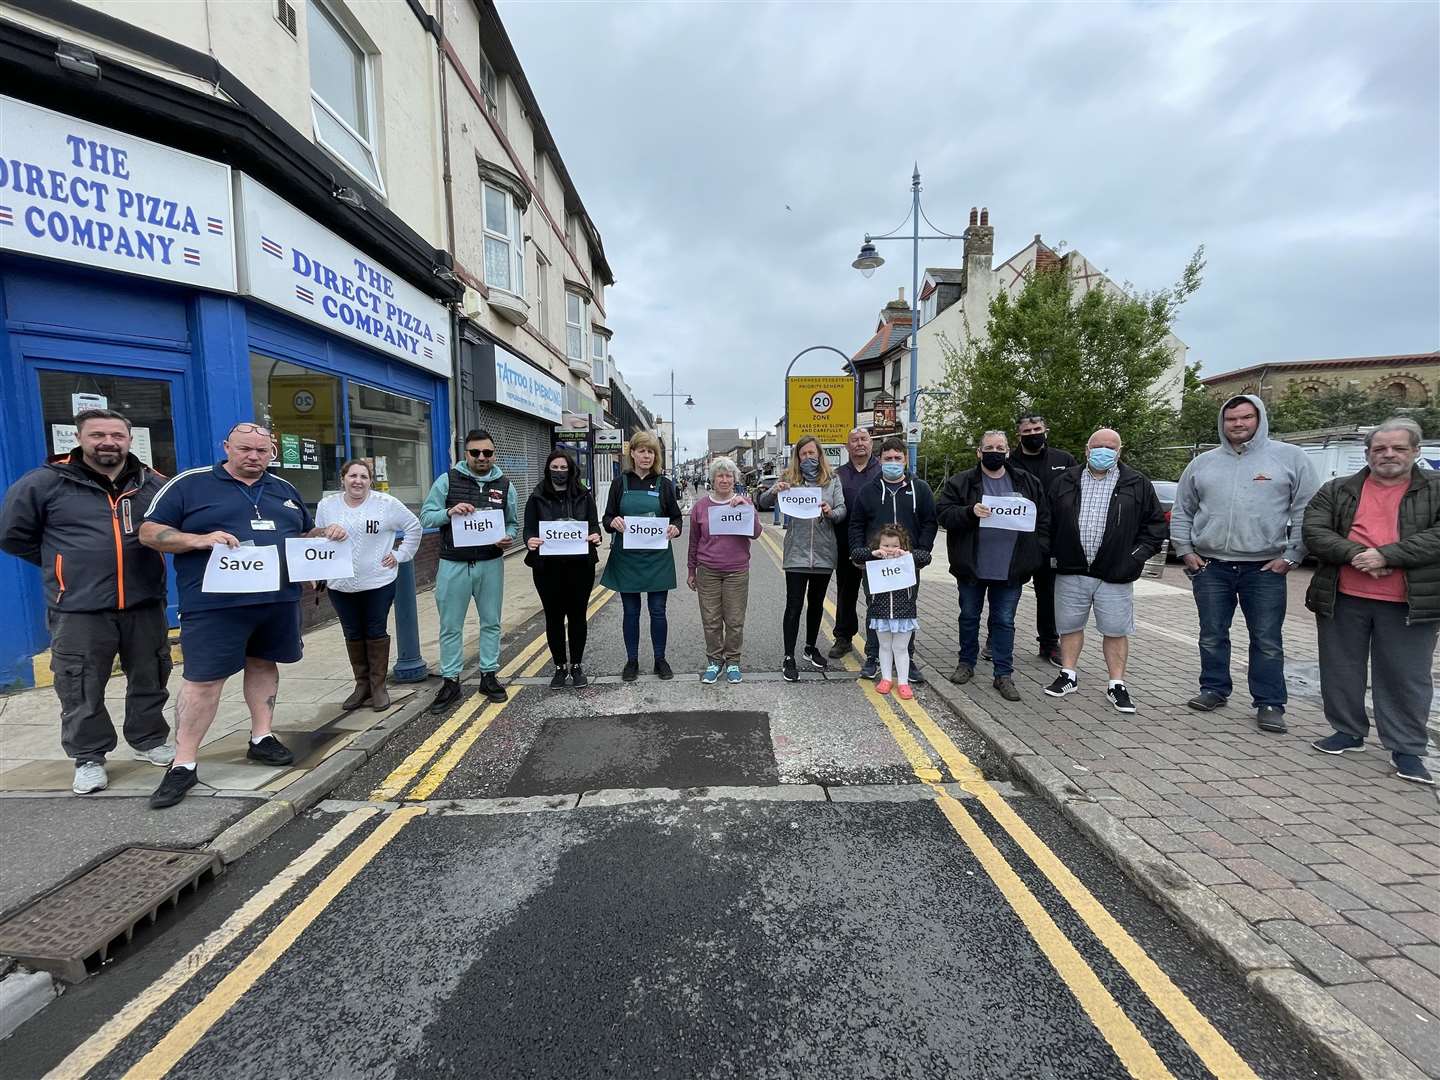 Fed-up shopkeepers staged a protest in Sheerness High Street against their town’s pedestrianisation scheme